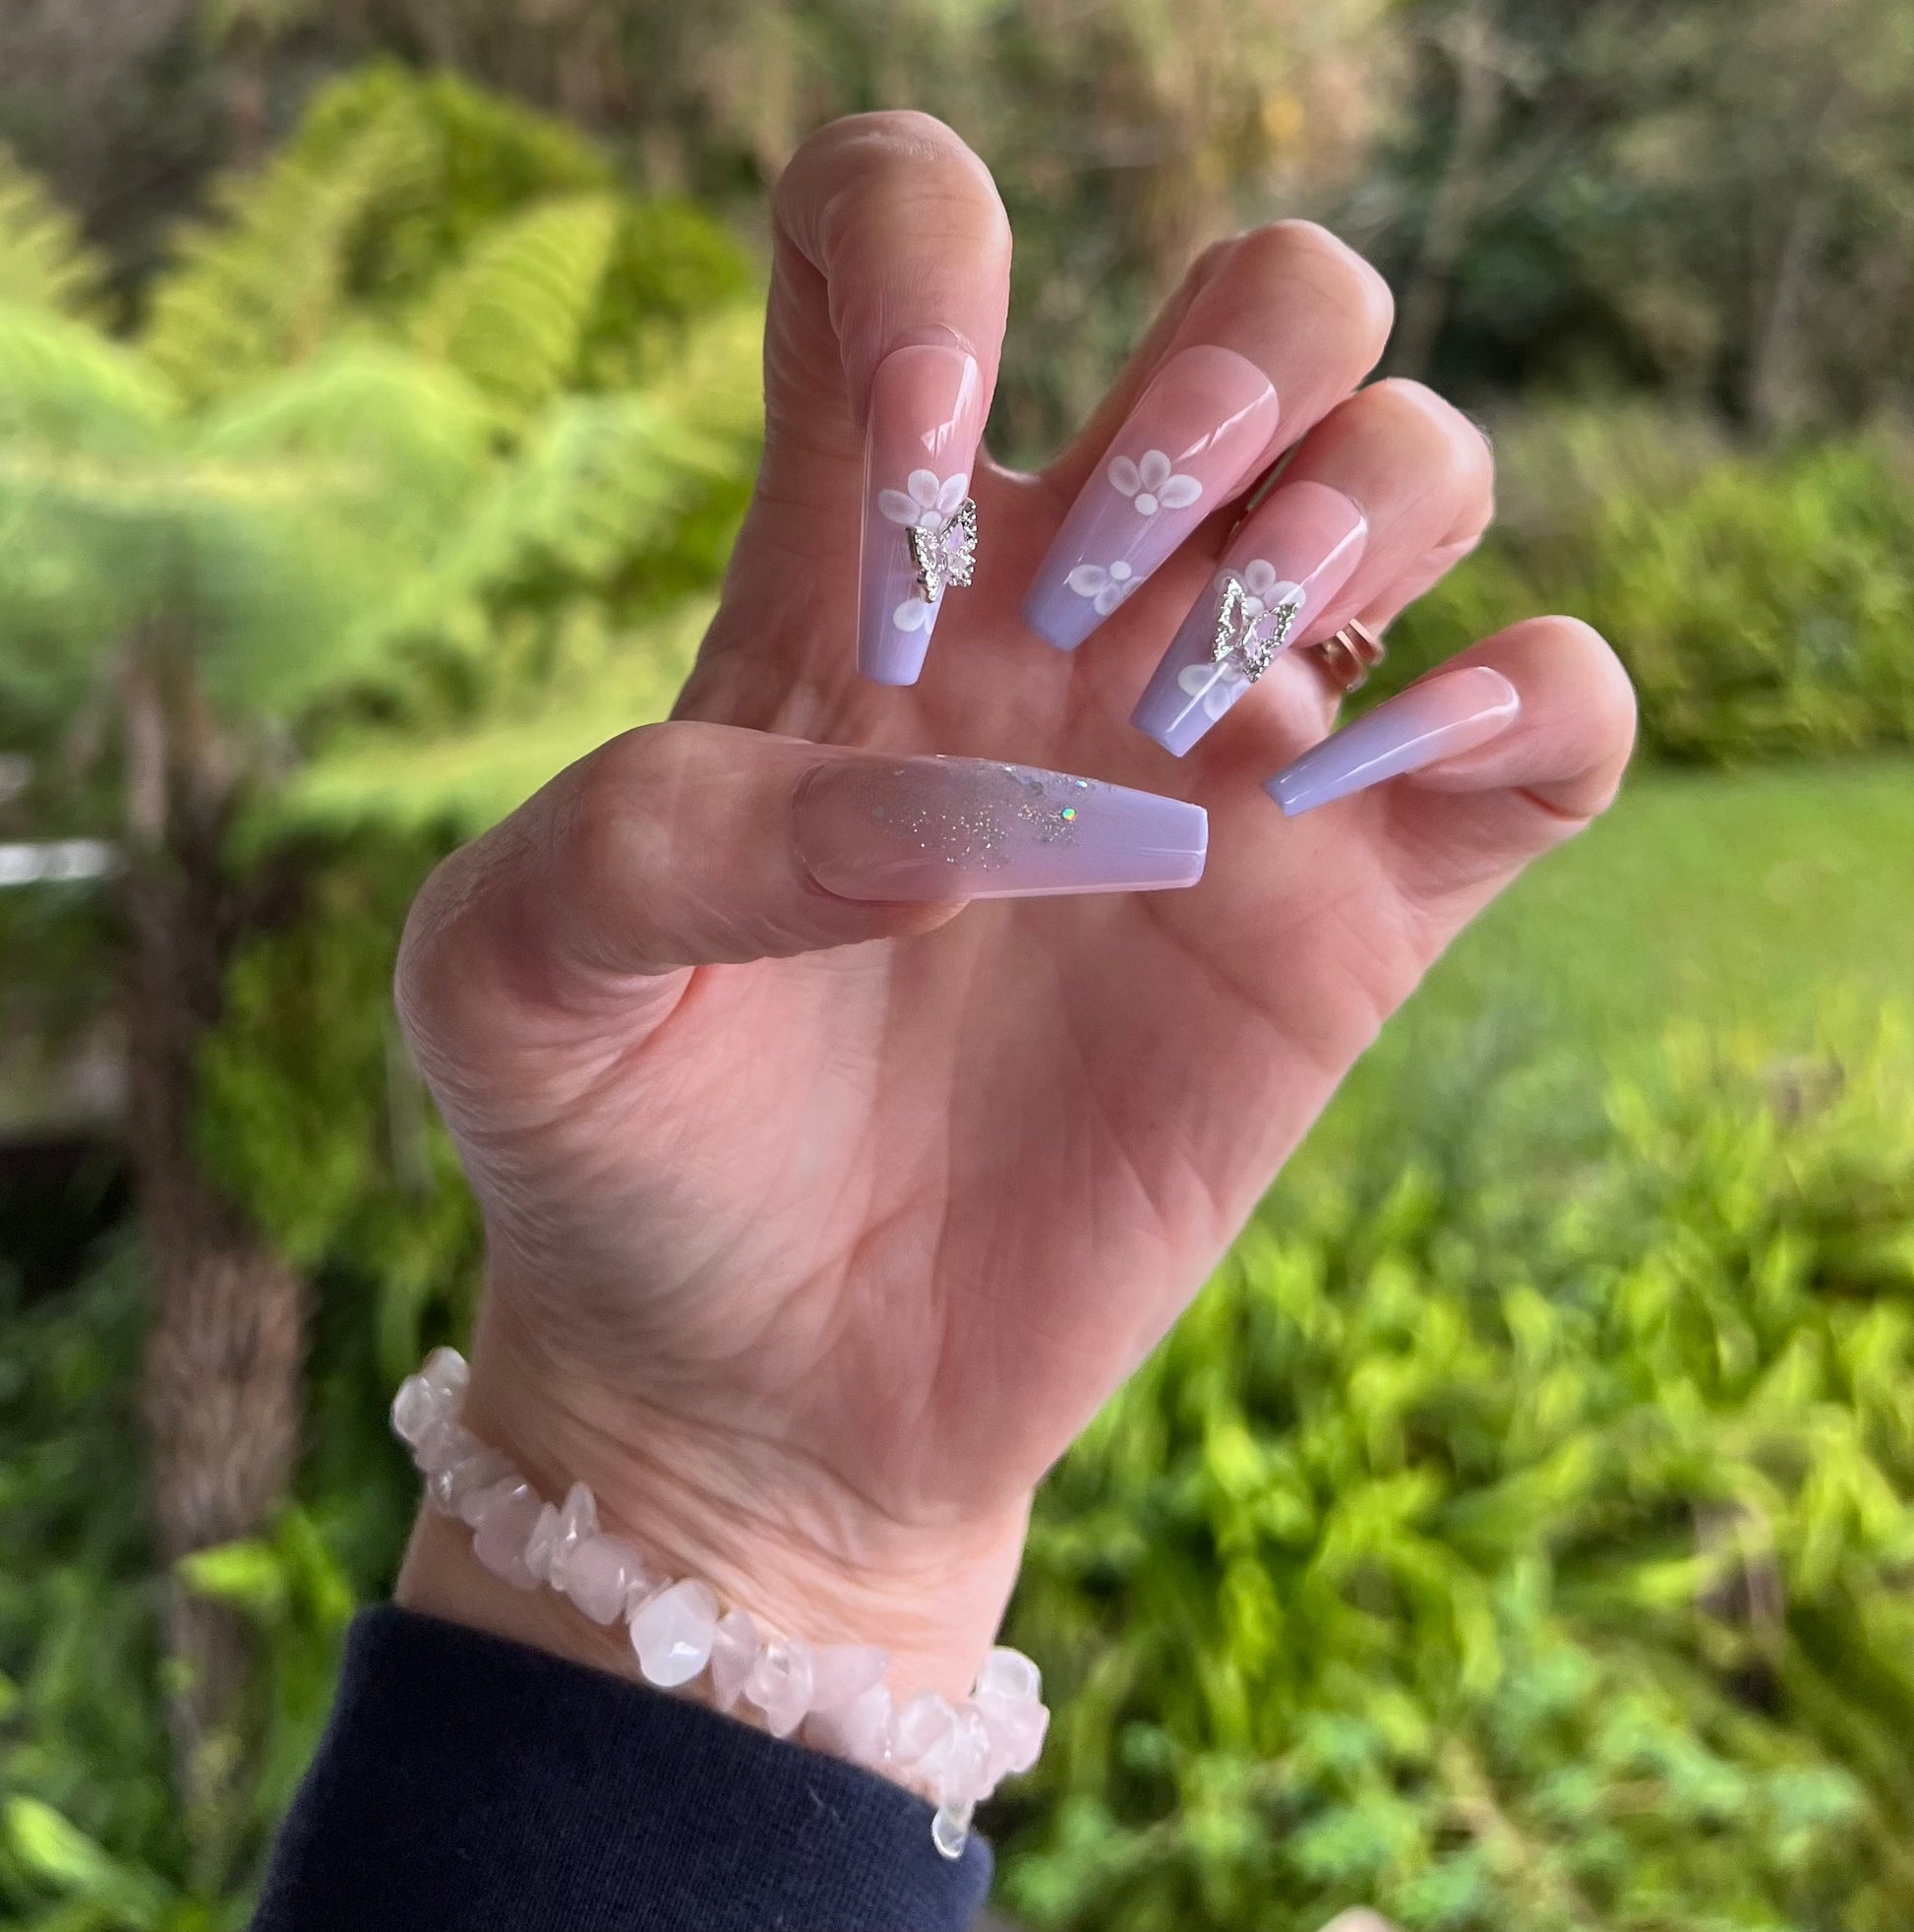 Long Coffin Press on Nails. Lilac & Pale Pink with Glitter, Silver 3D Butterflies & White Flowers. Durable Acrylic Press on Nails. Easy and quick to apply. Great for those special occasions, parties or add an edge to any outfit. Gorgeous, flattering and you can re-use them again and again.